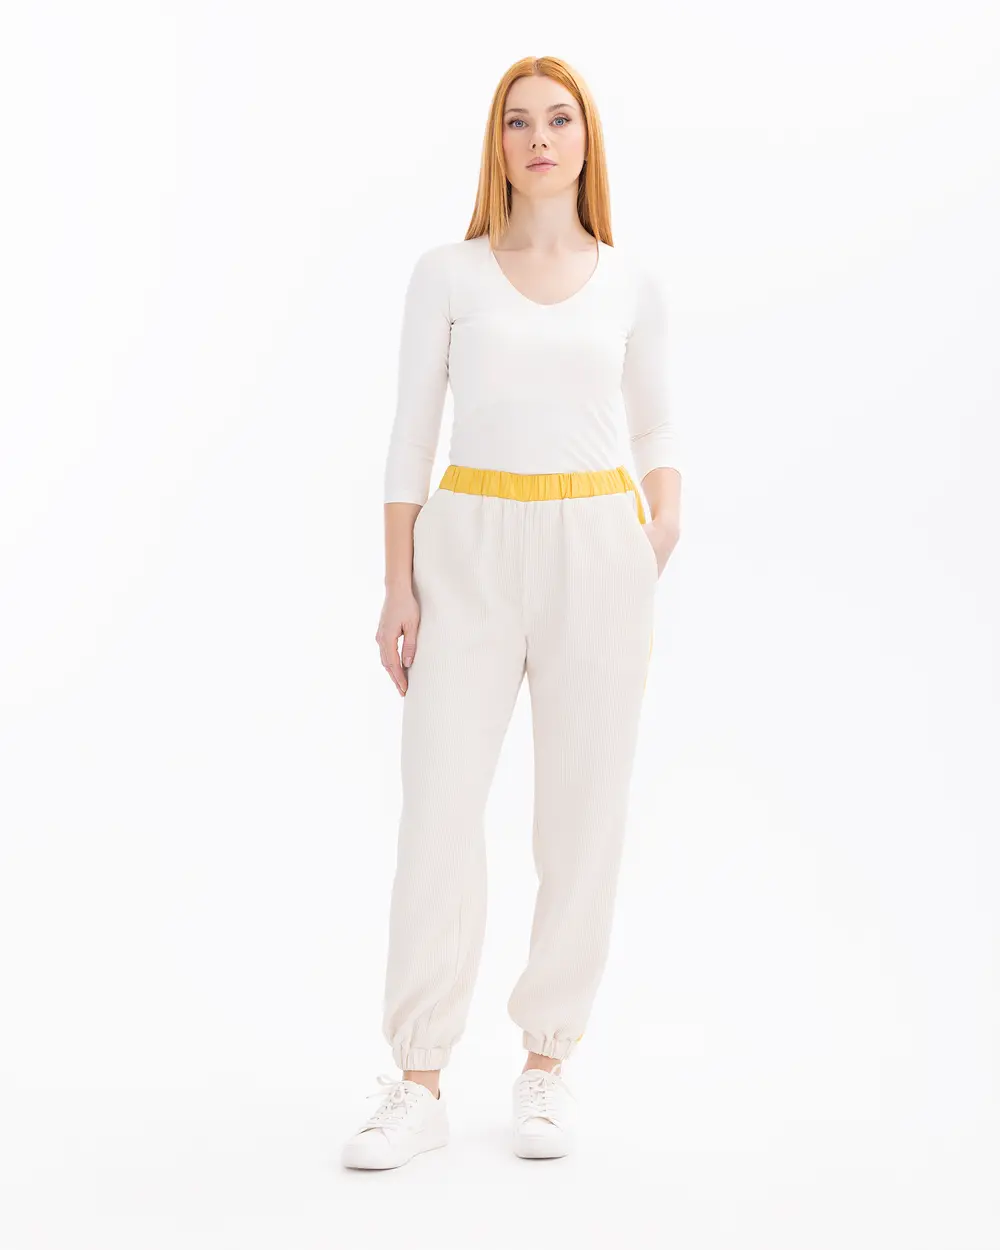 Ankle Length Pants with Elastic Waist Pockets